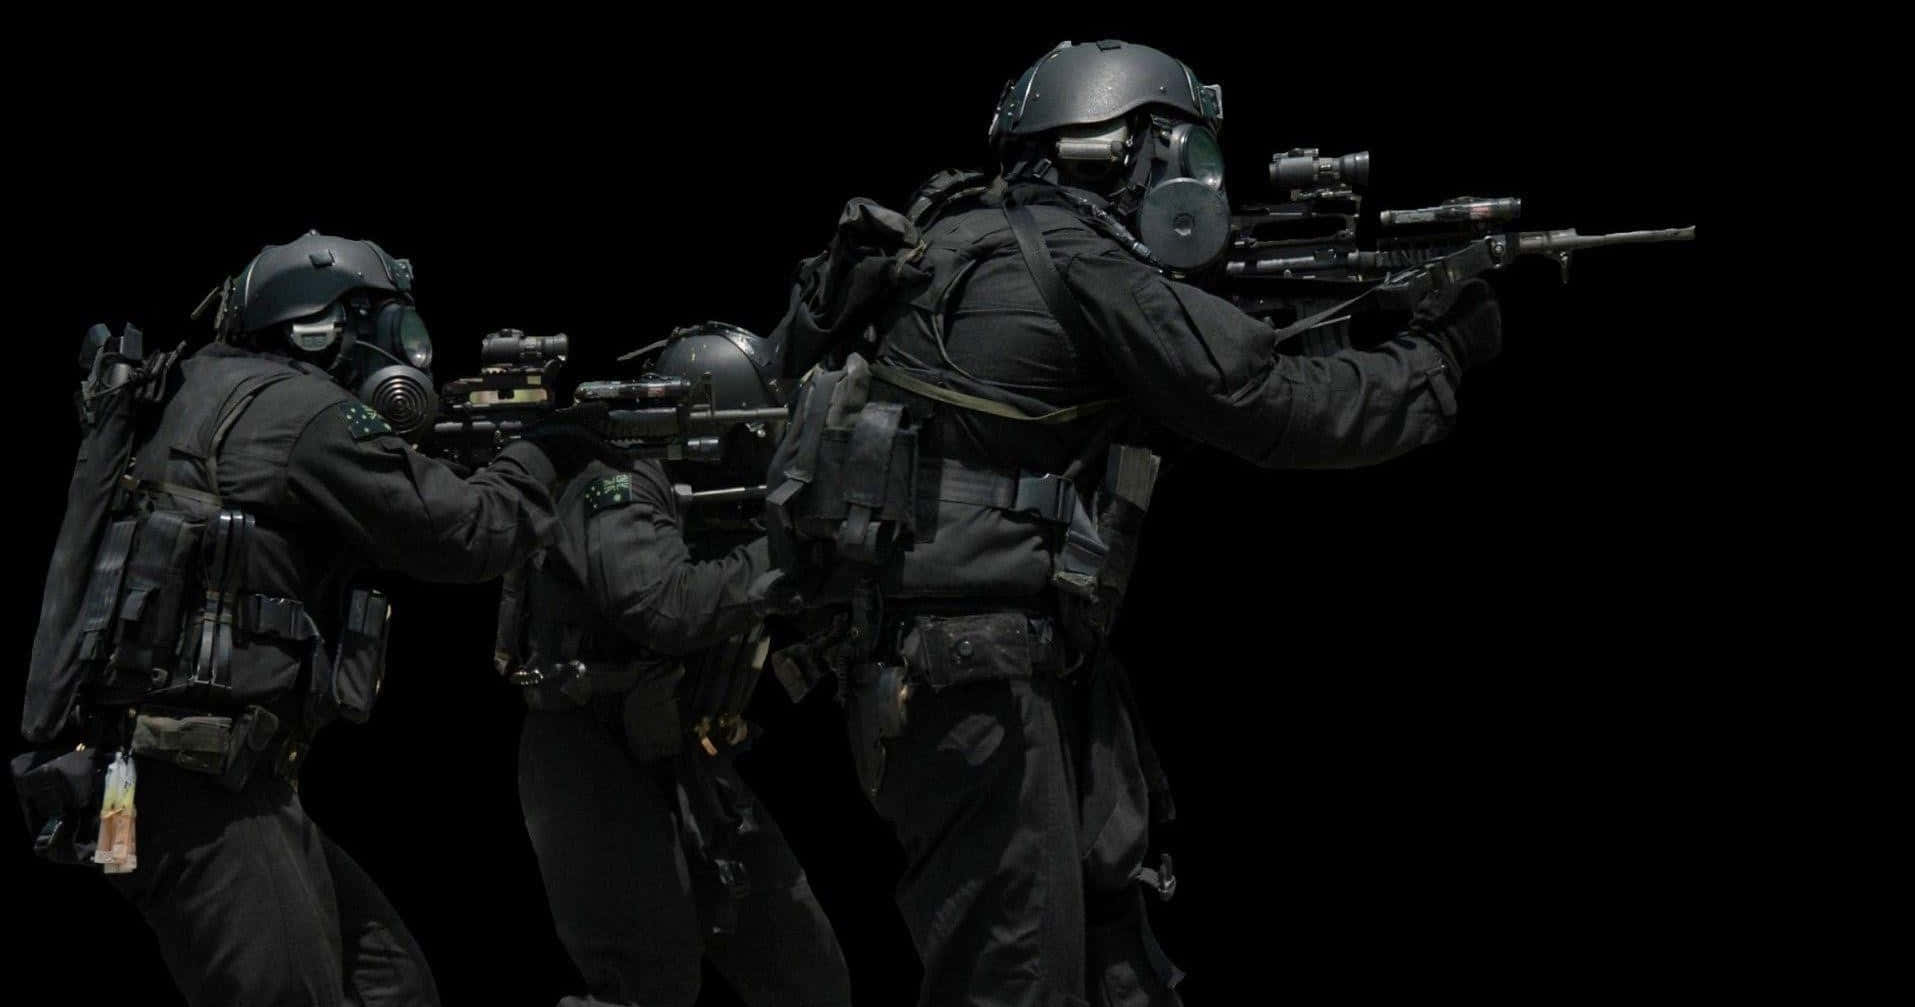 A Group Of Soldiers In Black Uniforms Are Holding Guns Background